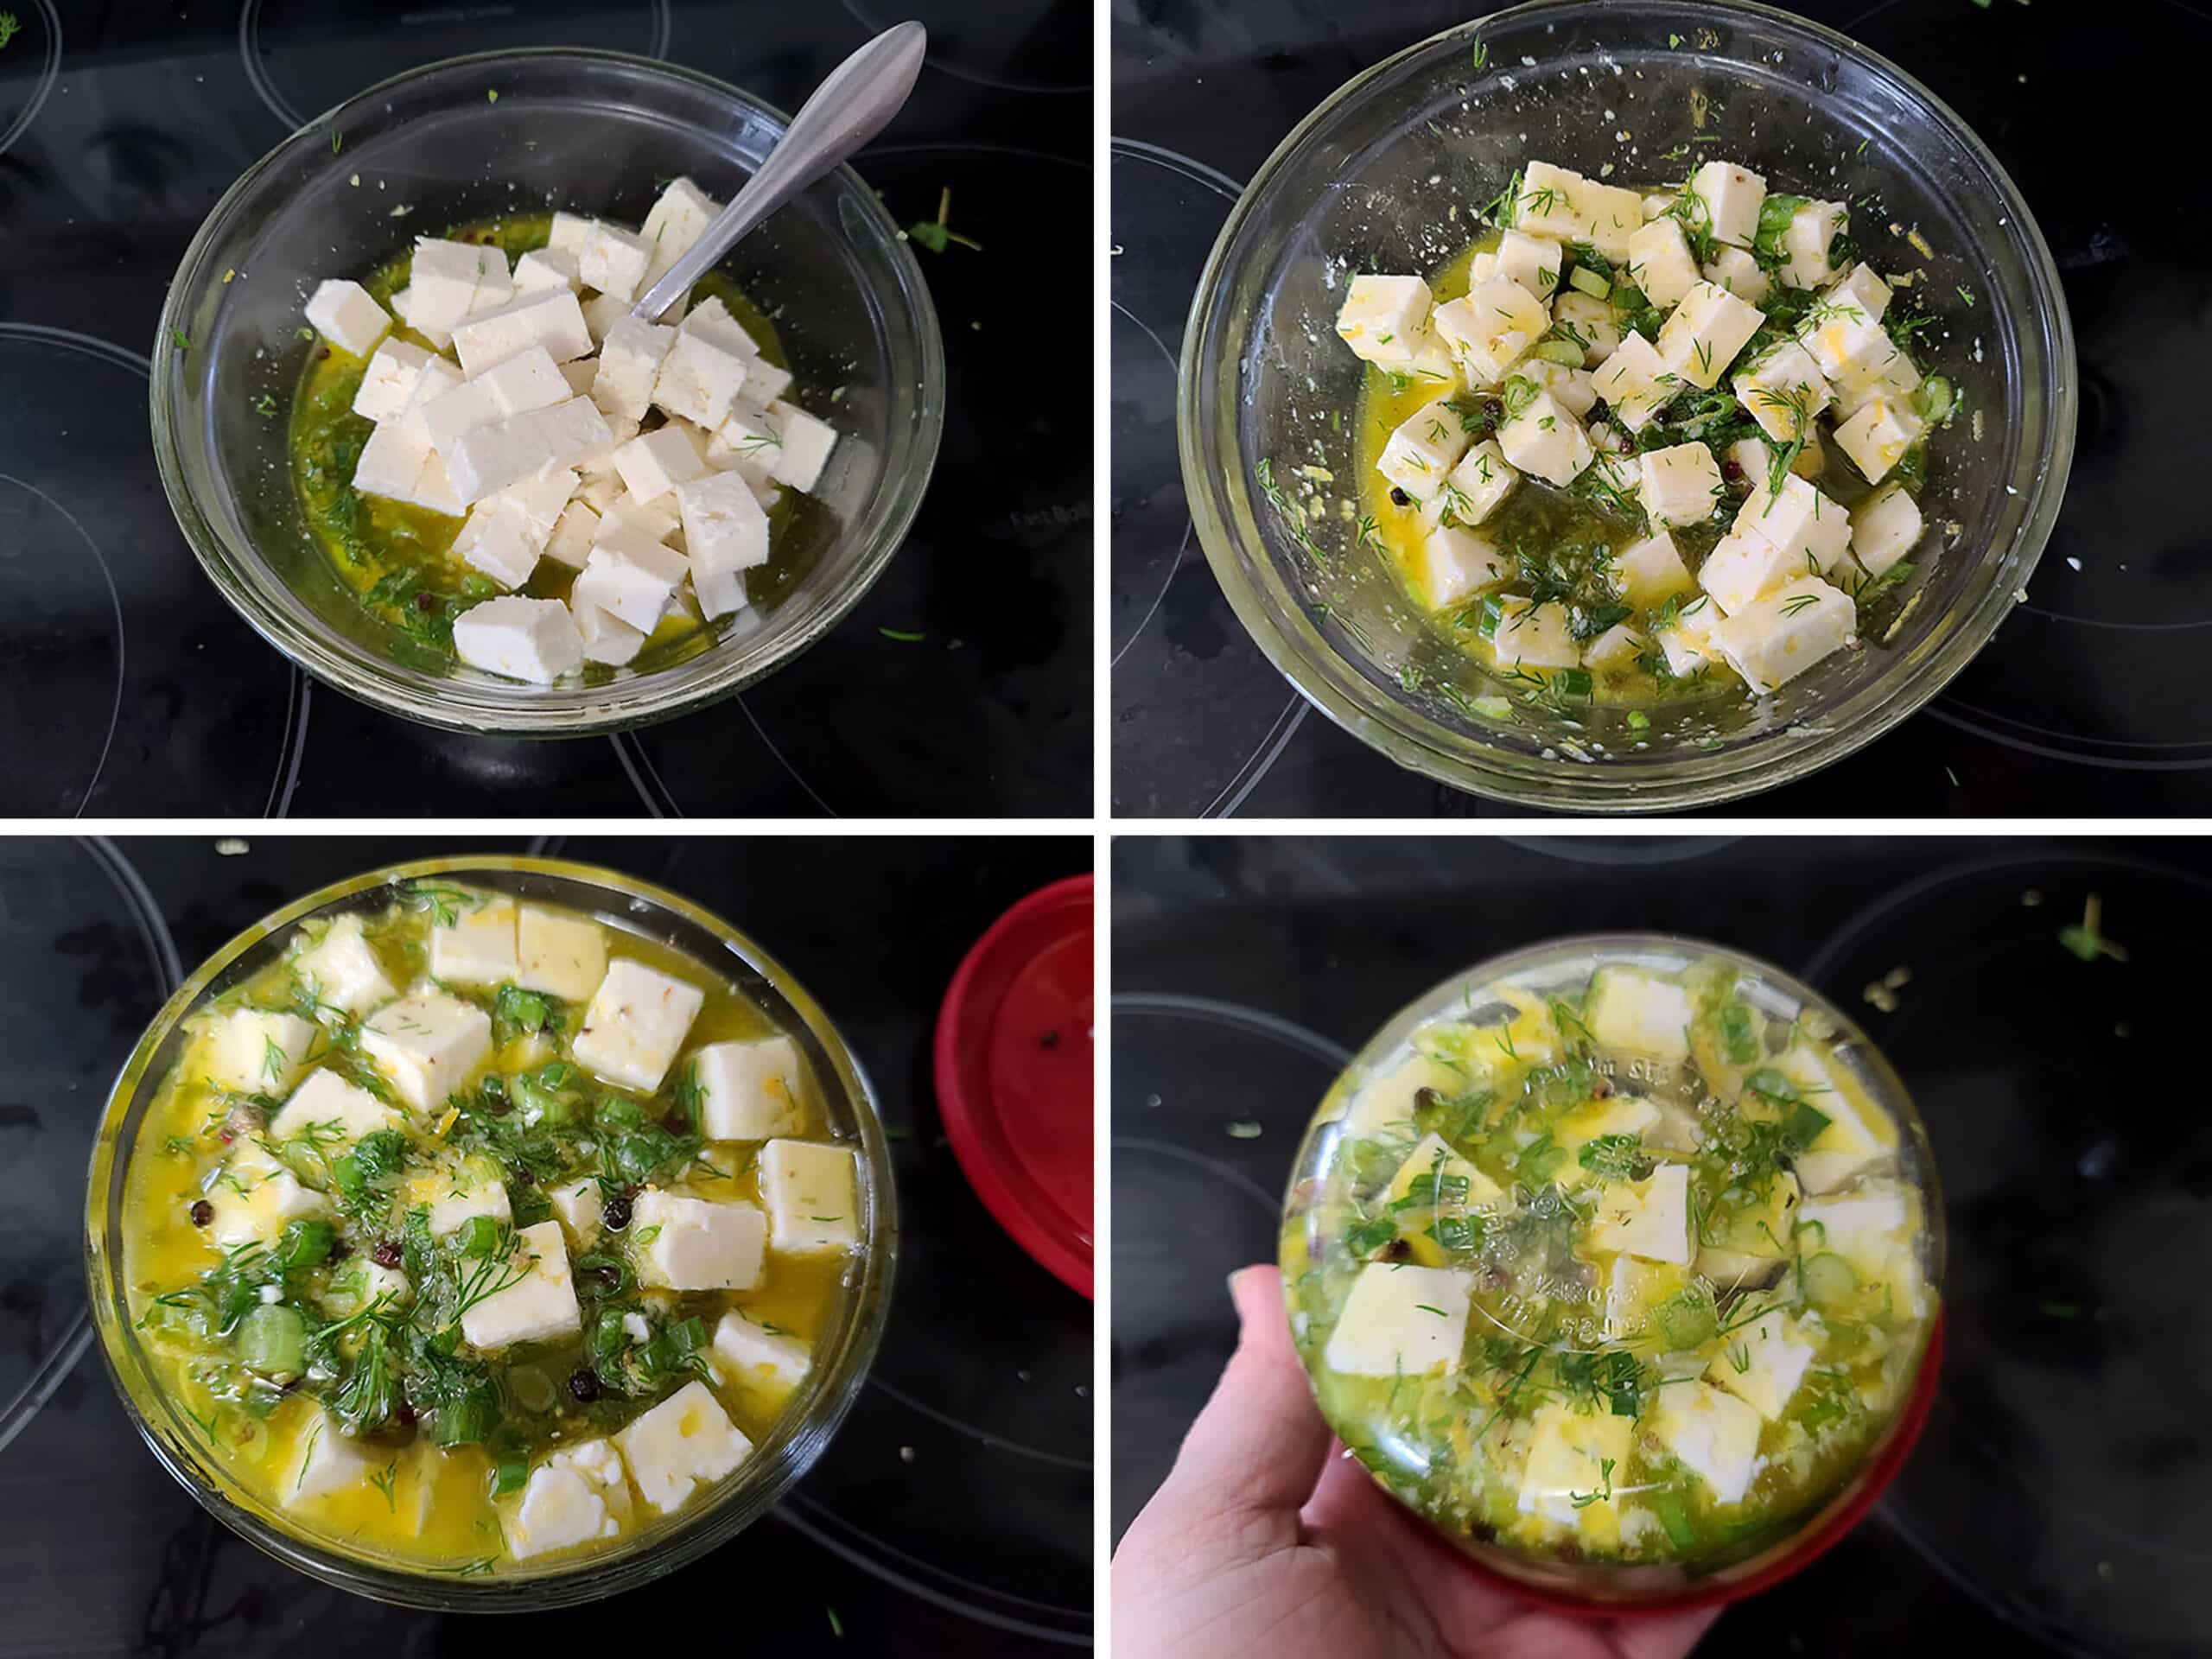 A 2 part image showing small cubes of feta in the marinade.